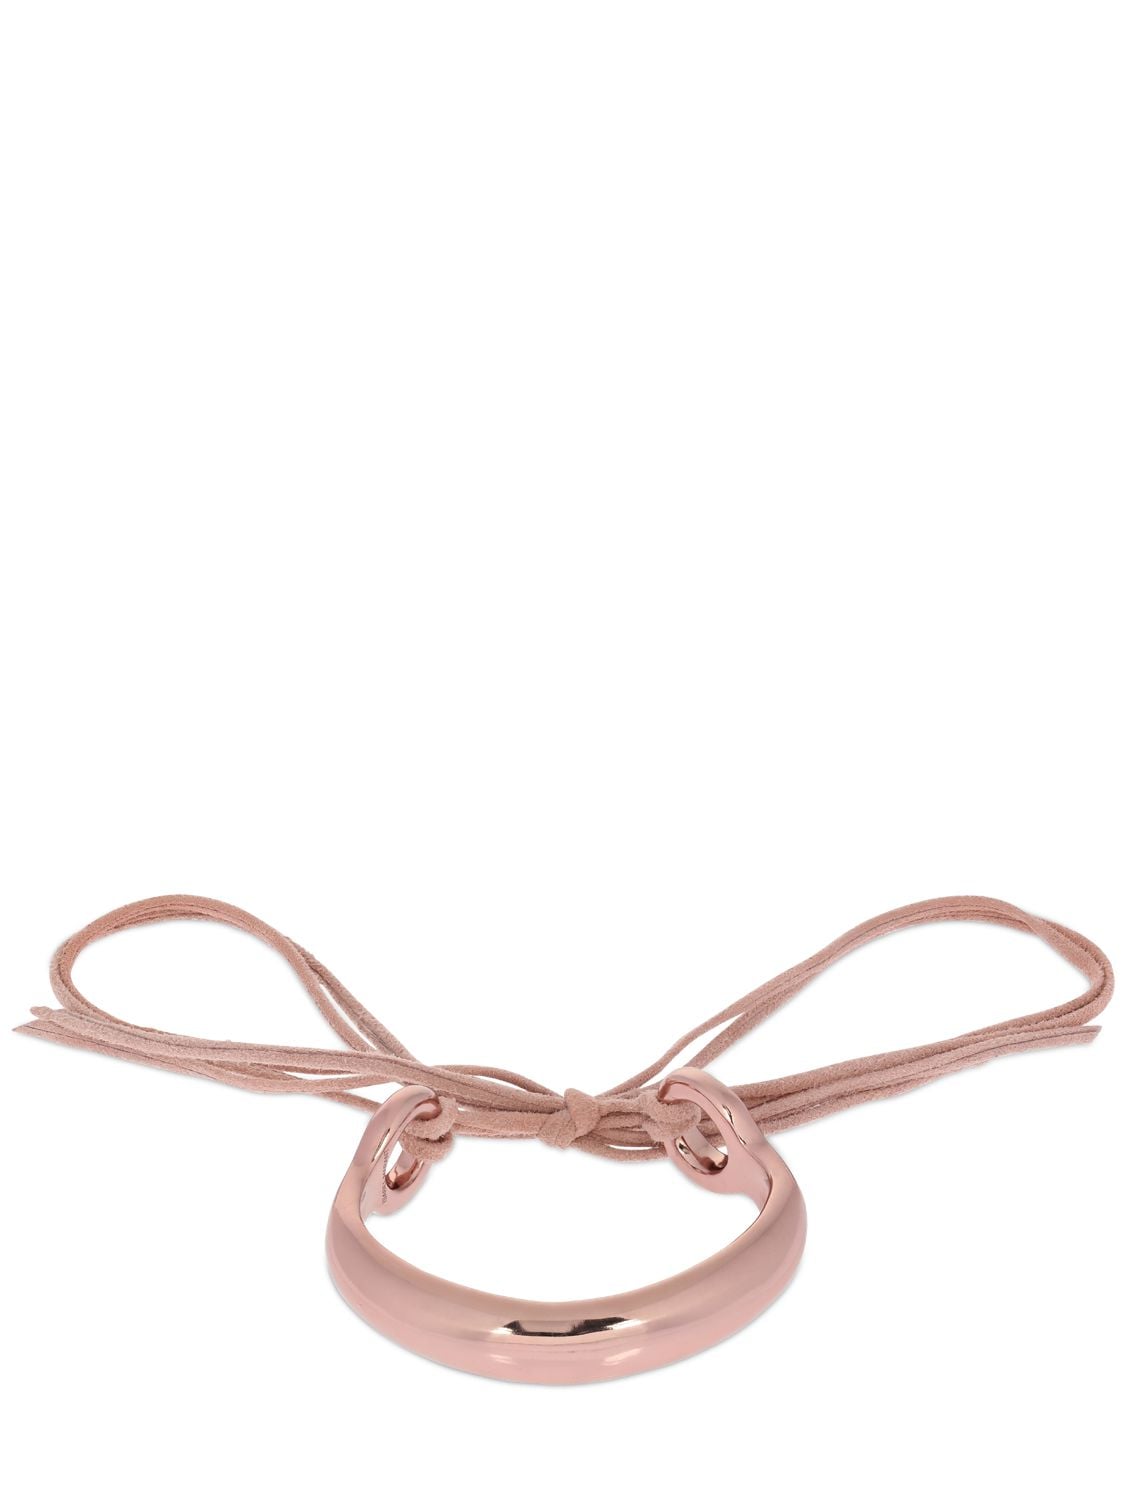 Isabel Marant Hip Color Cuff Bracelet W/ Leather Ties In Pink